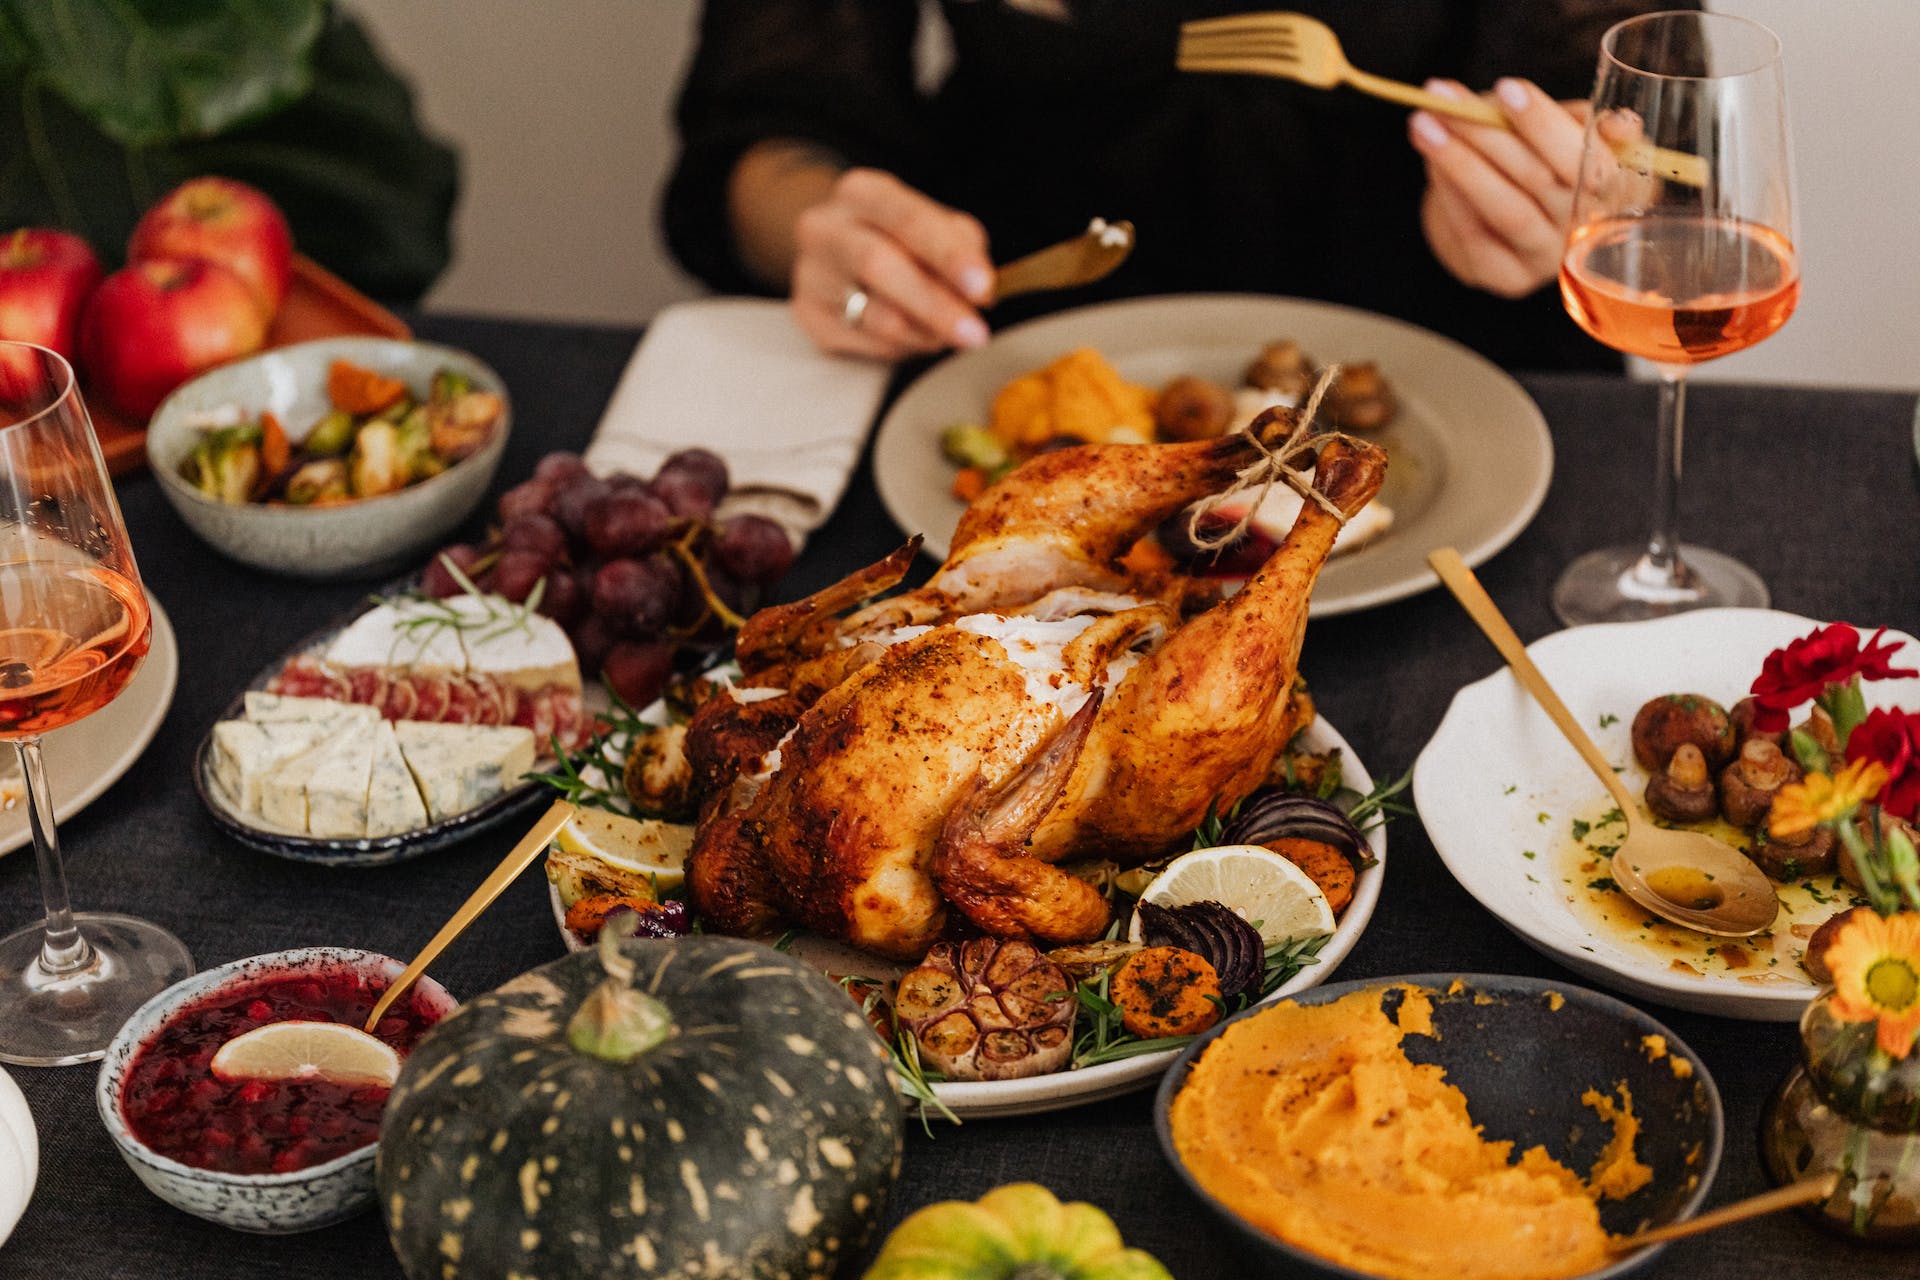 Thanksgiving dinner served on the table | Source: Pexels